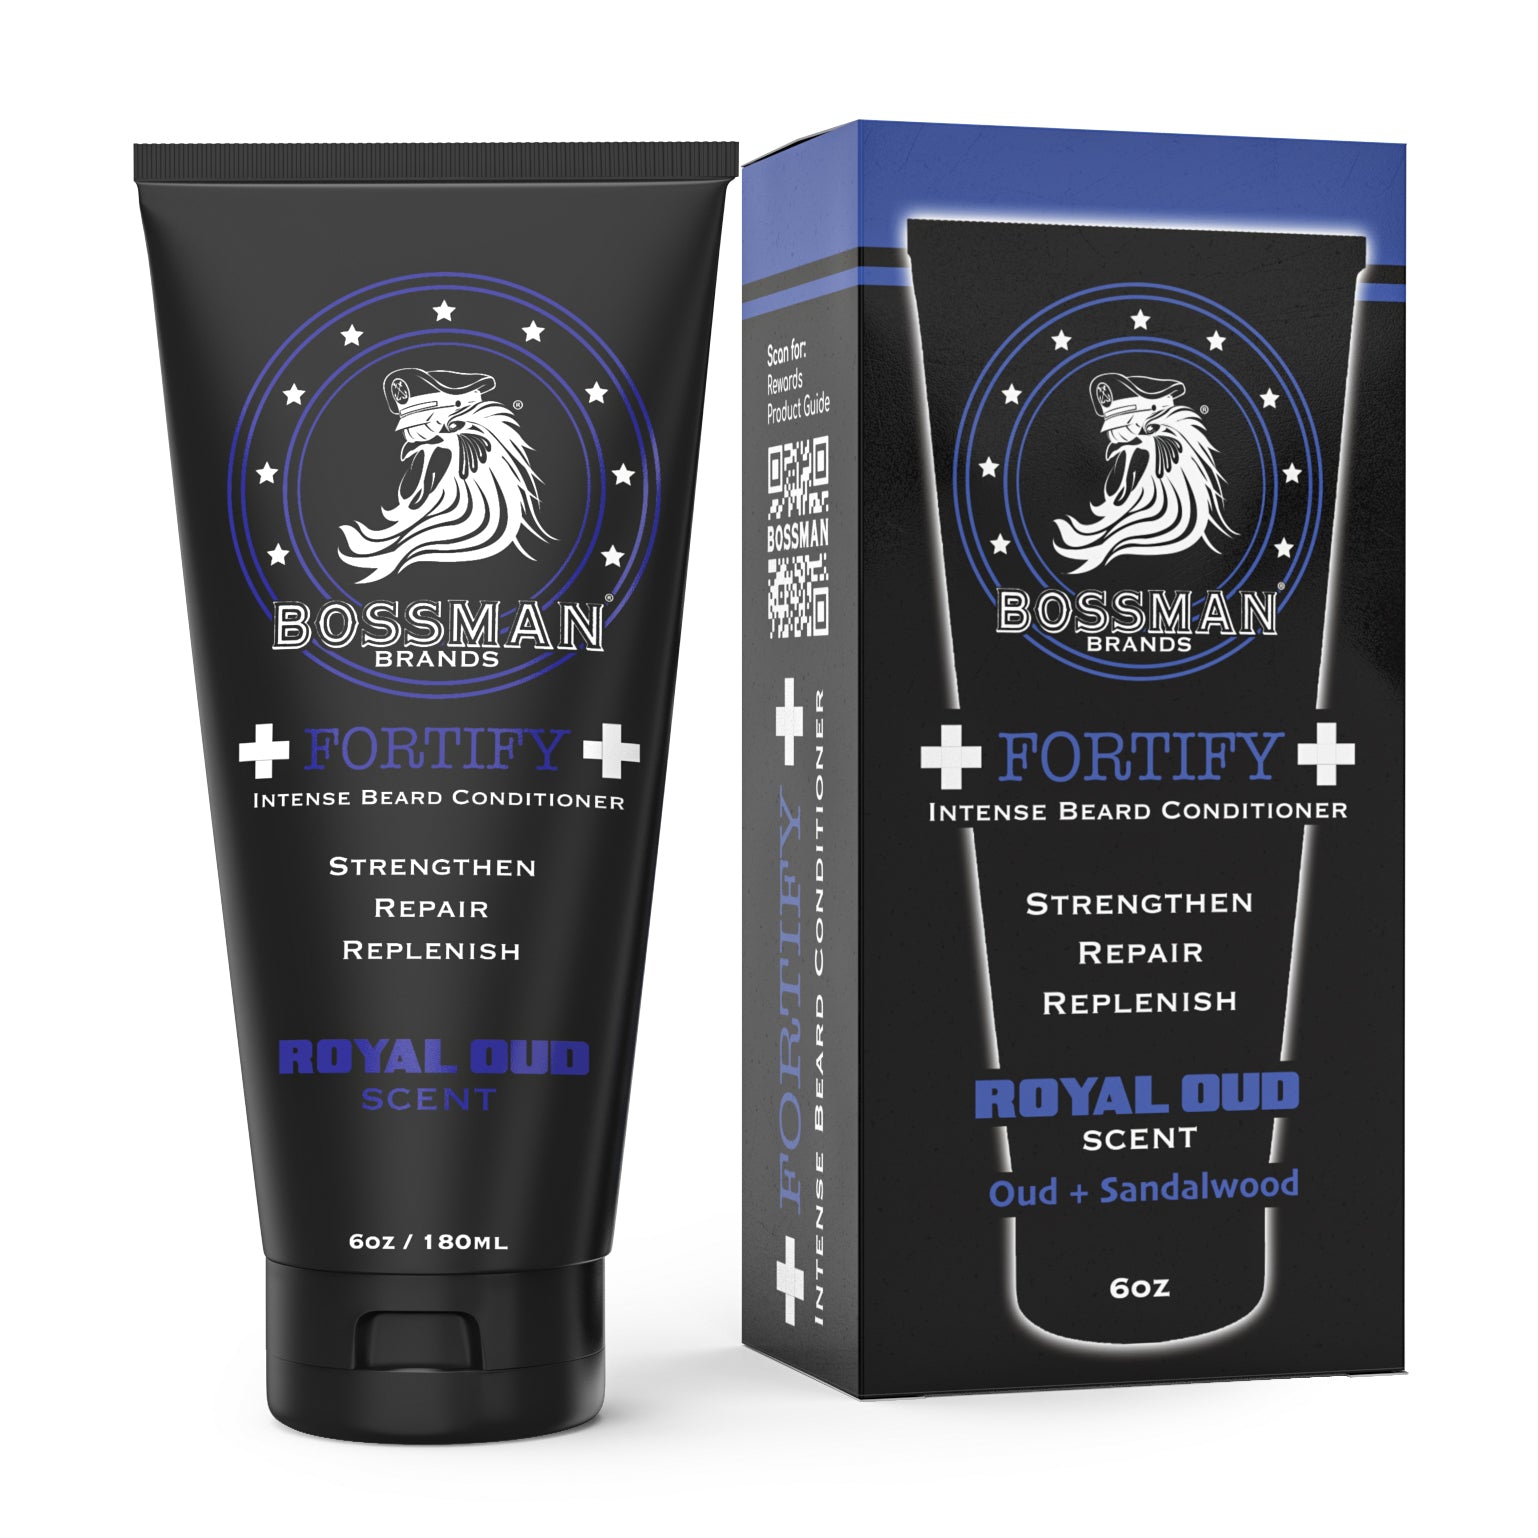 Fortify Intense Beard Conditioner - The Top Rated Beard Conditioner for Men